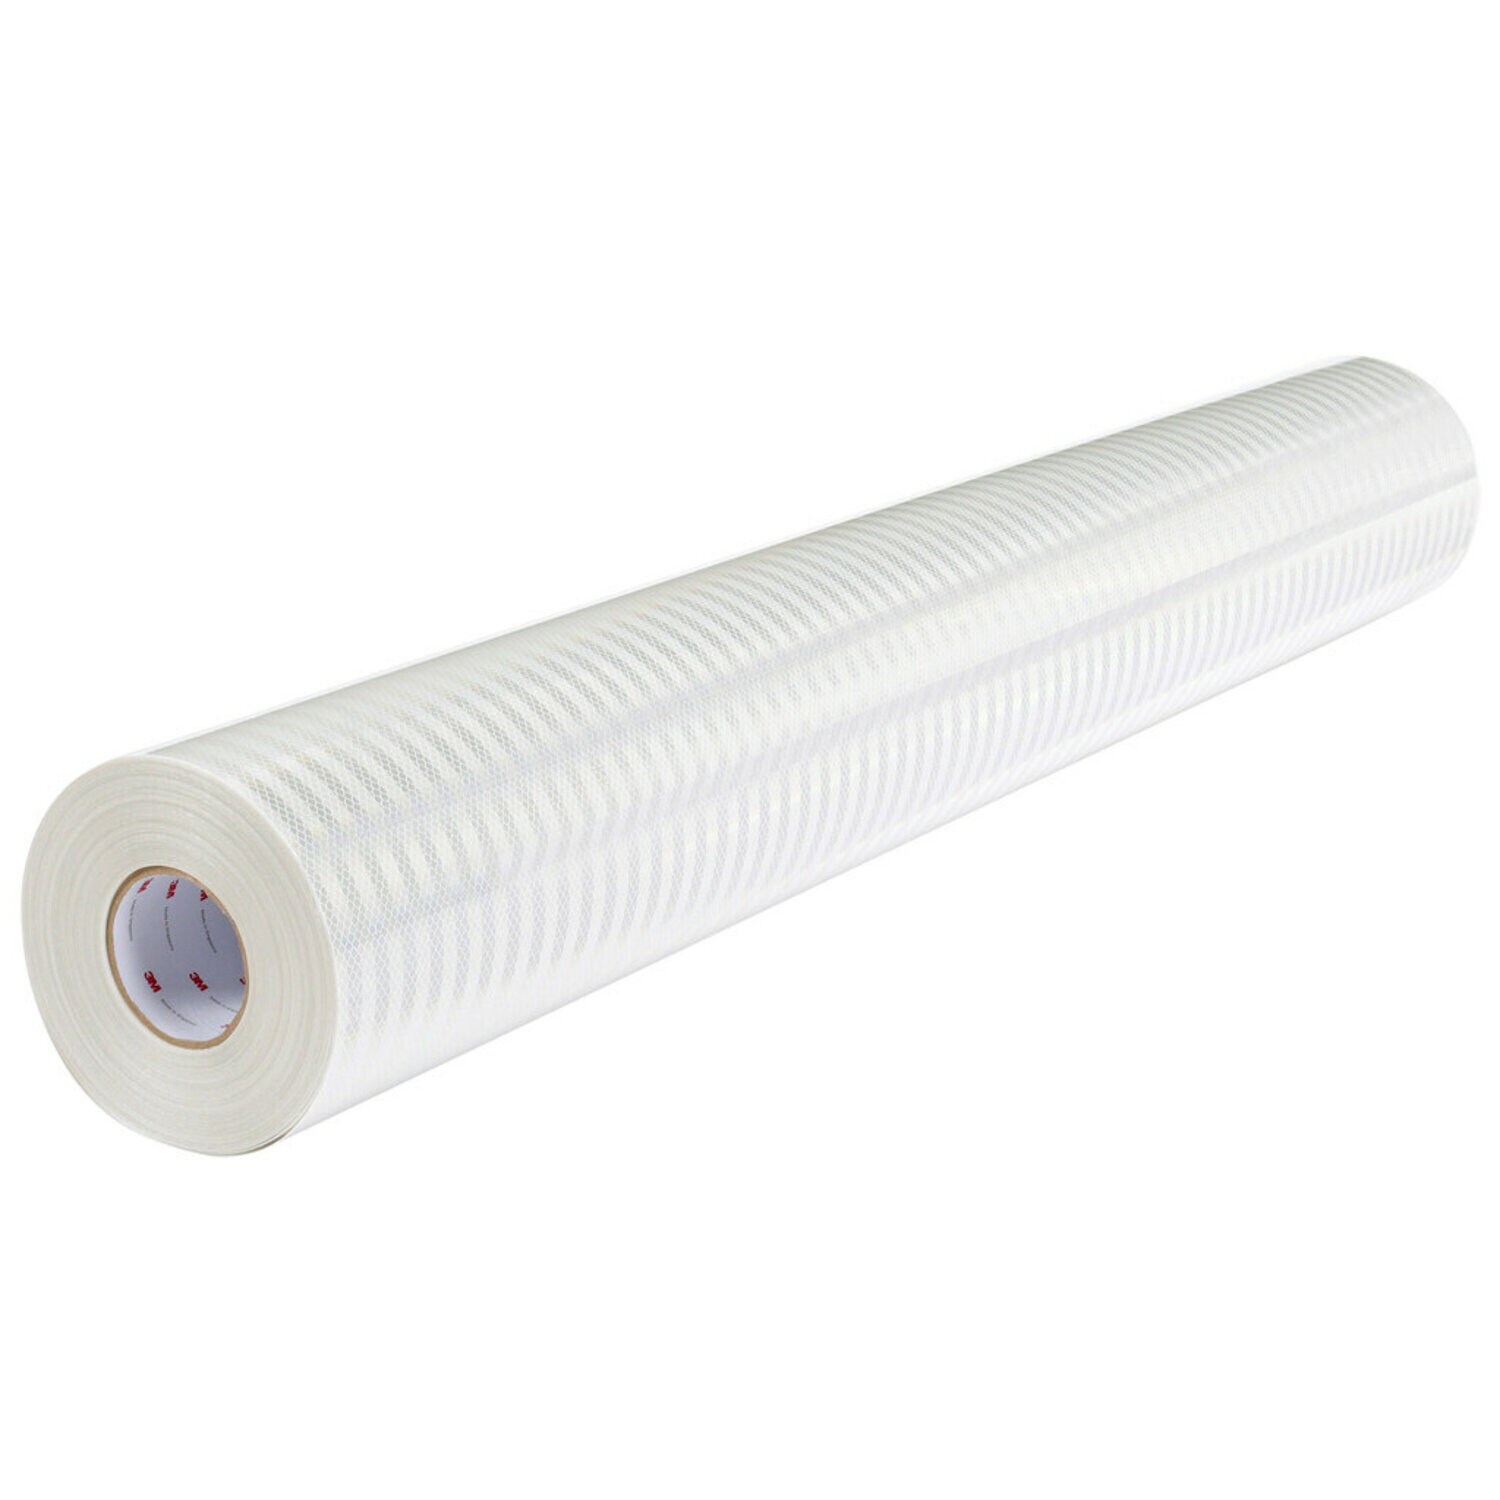 7100282394 - 3M High Intensity Prismatic Reflective Digital Sheeting 3930UDS, White, 24 in x 50 yd, 1 Roll/Case